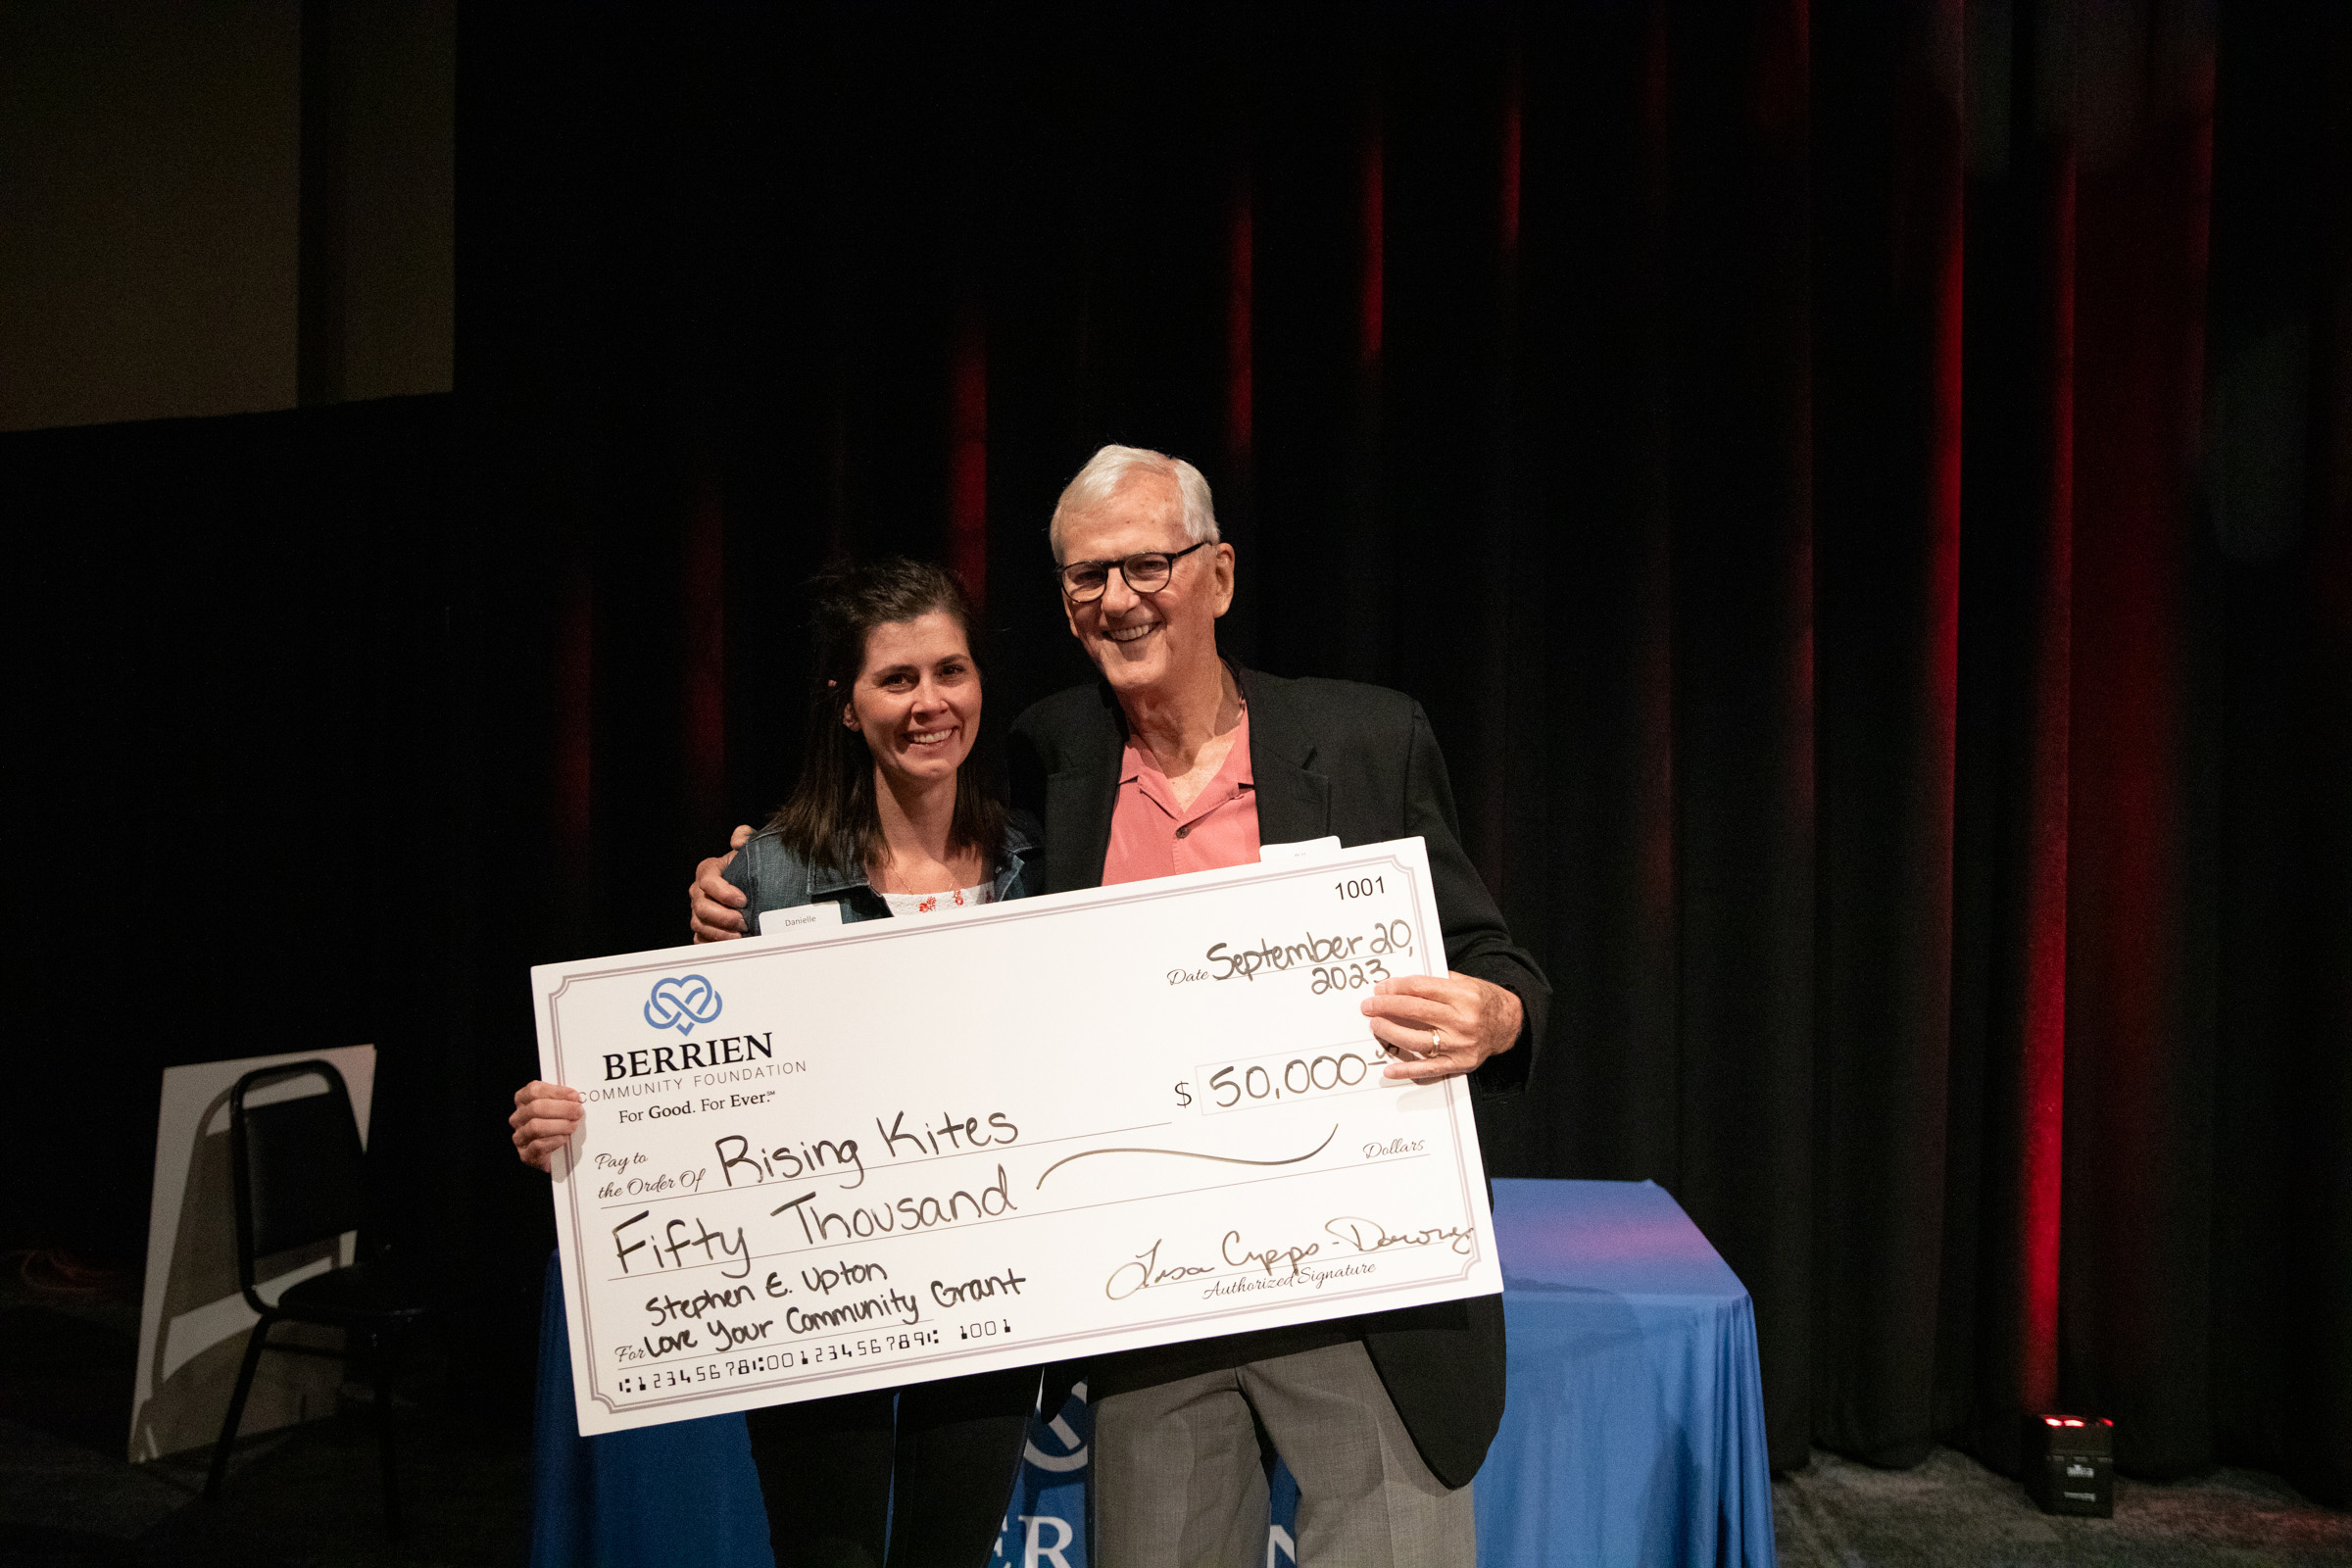 Danielle Grandholm poses with William Marohn and a $50,000 check after being announced as the winner of the Stephen E. Upton Love Your Community Grant September 20 at Berrien Community Foundation's Annual Meeting & Celebration.